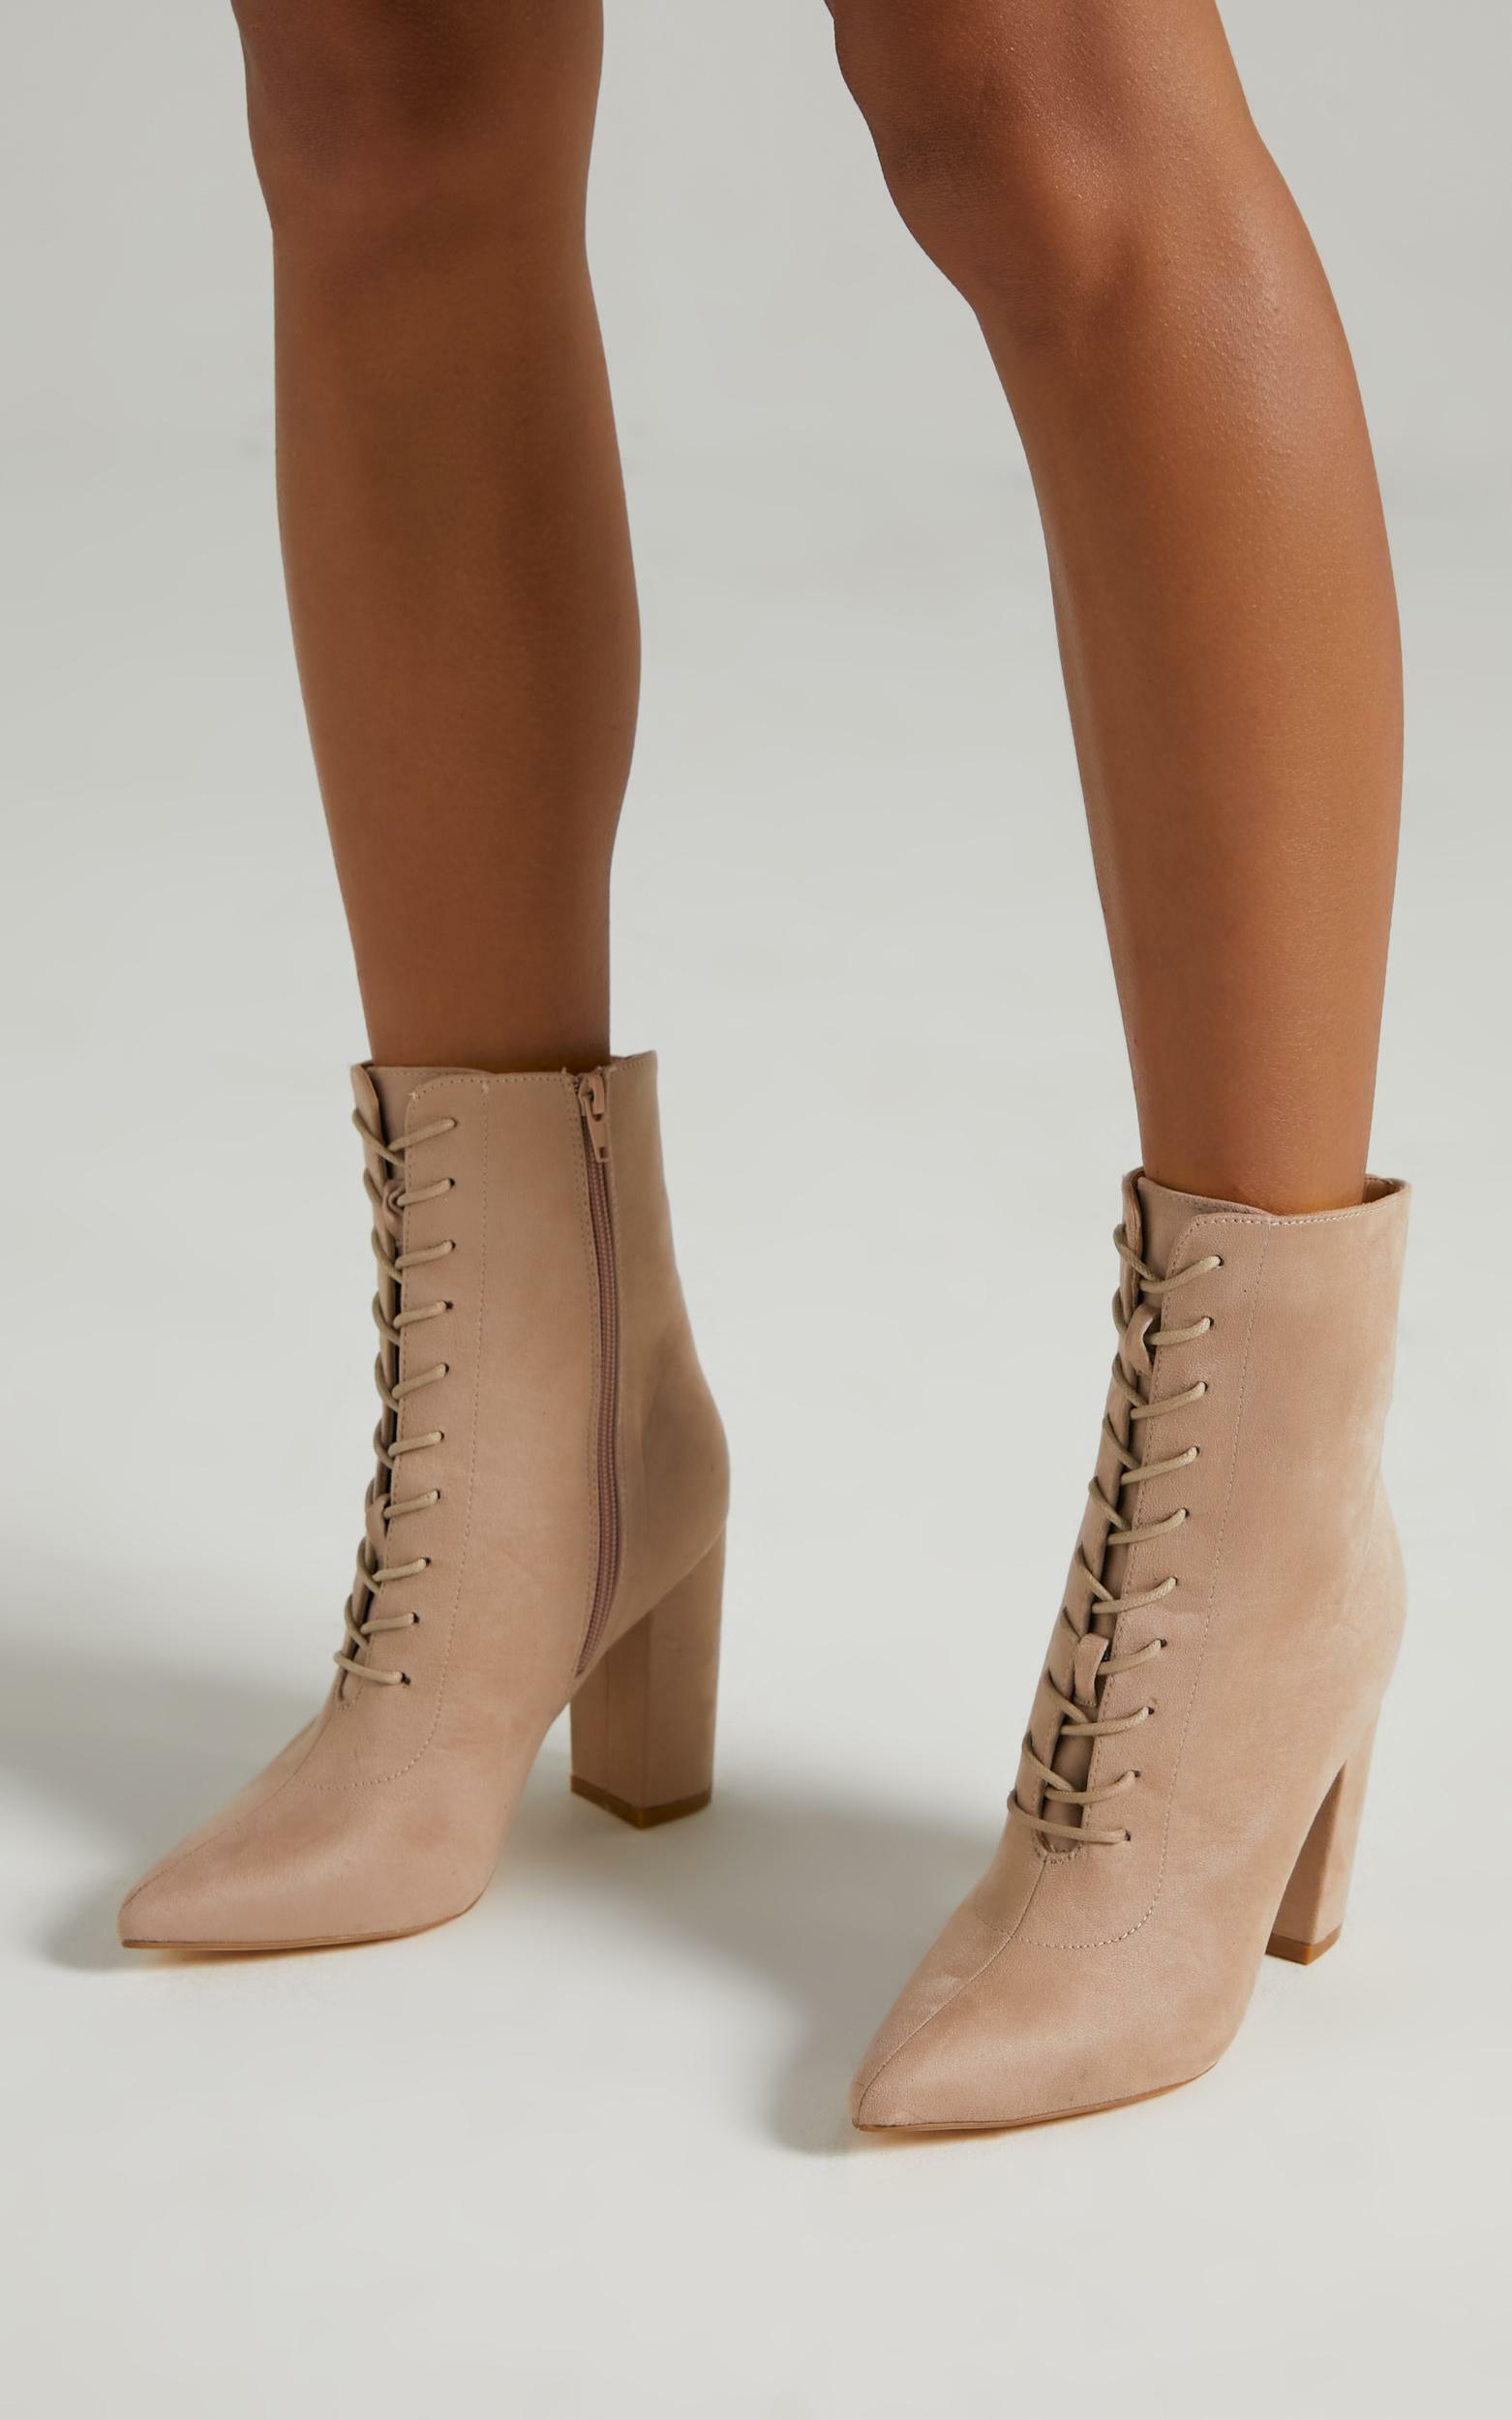 Verali - Danielle Boots in Blush Micro - 05, PNK2, hi-res image number null